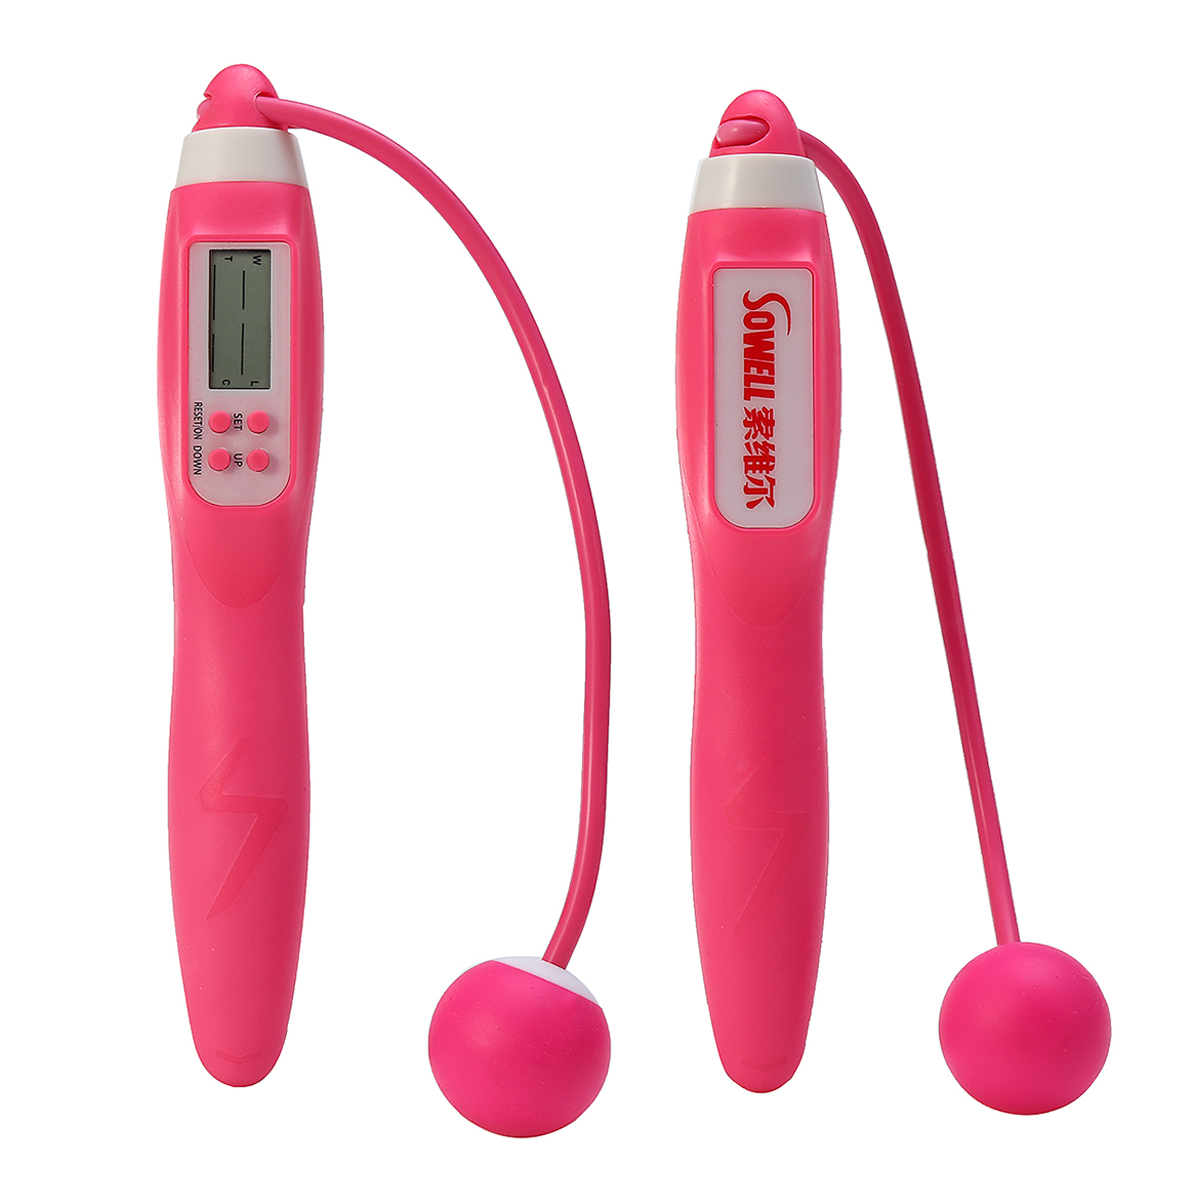 2-In-1-Smart-Digital-Rope-Jumping-Calorie-Counter-Home-Fitness-LCD-Display-Adjustable-Skipping-Rope-1678706-2